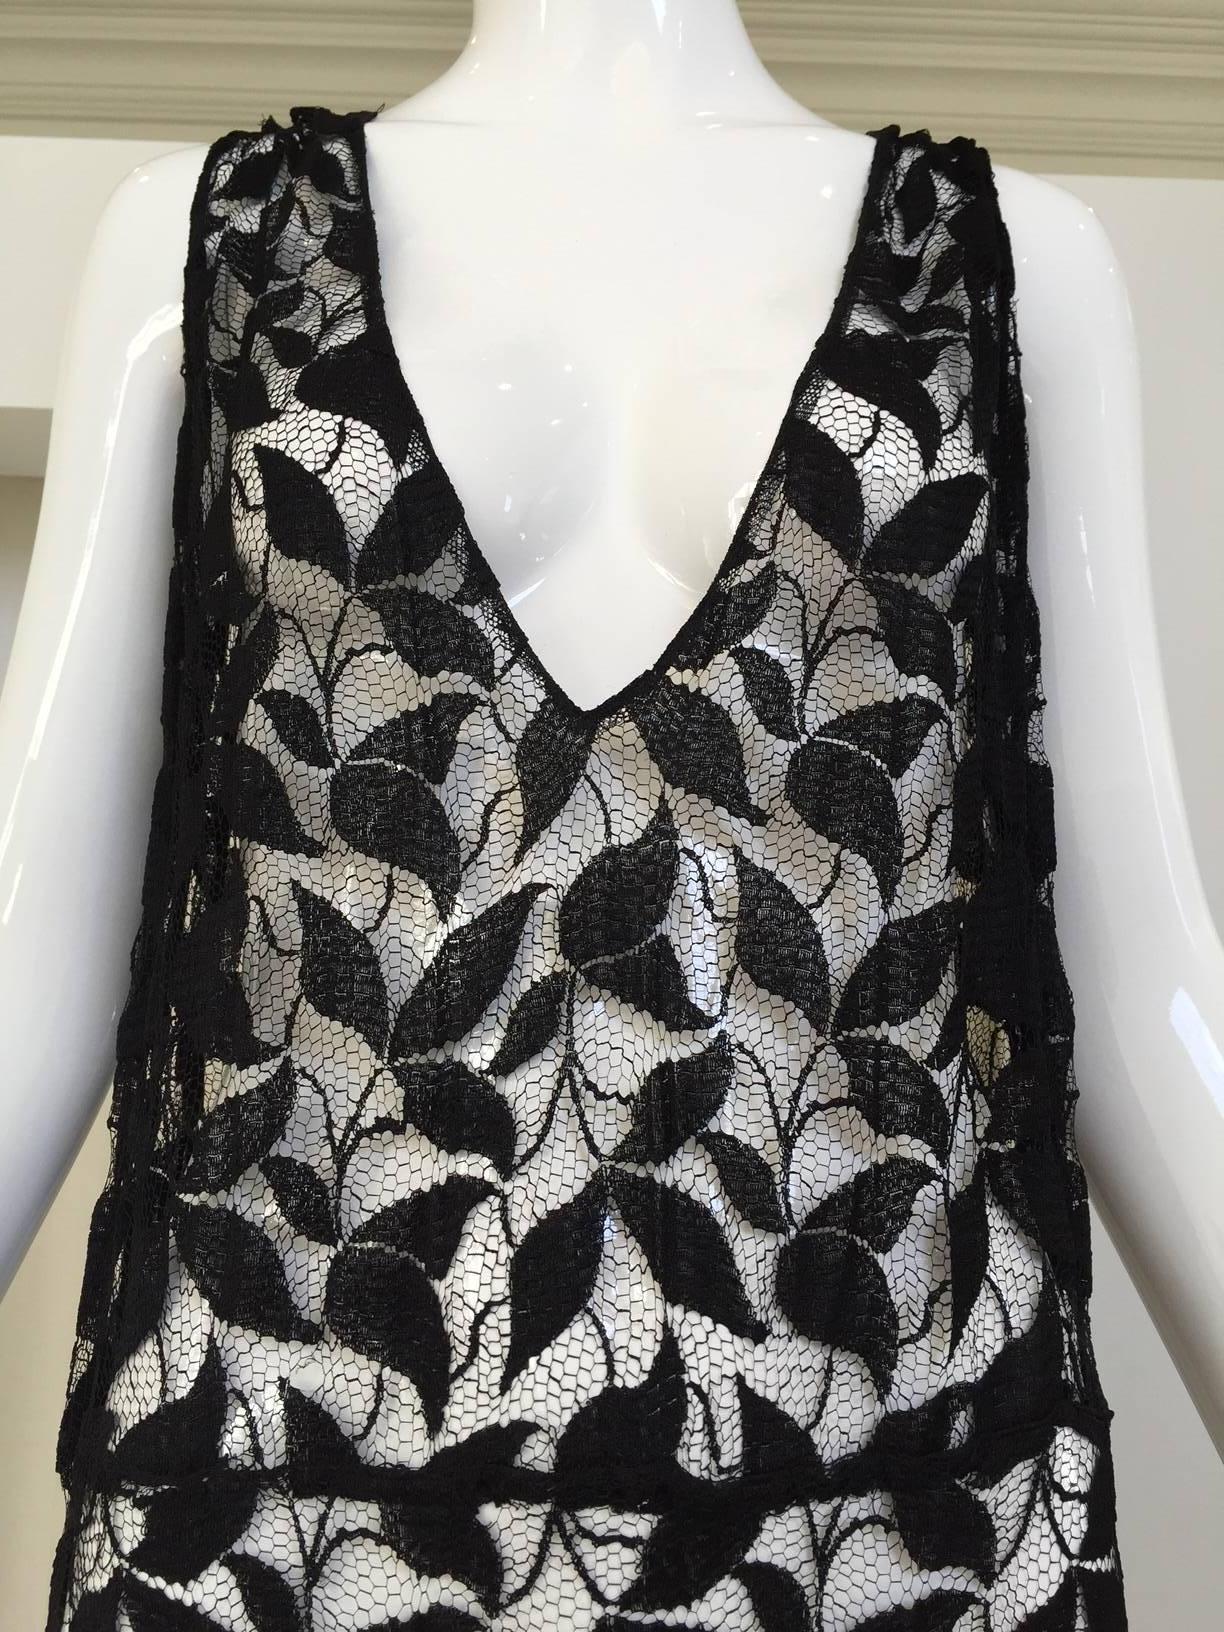 For Design purpose . some tears on both shoulders.  ( see pictures) overall this dress still wearable.
Beautiful 1930s silk lace with leaves cut out.  Size: 6/8
Bust: 40/ Waist: 38"/ hip: 40"/ Length: 59"